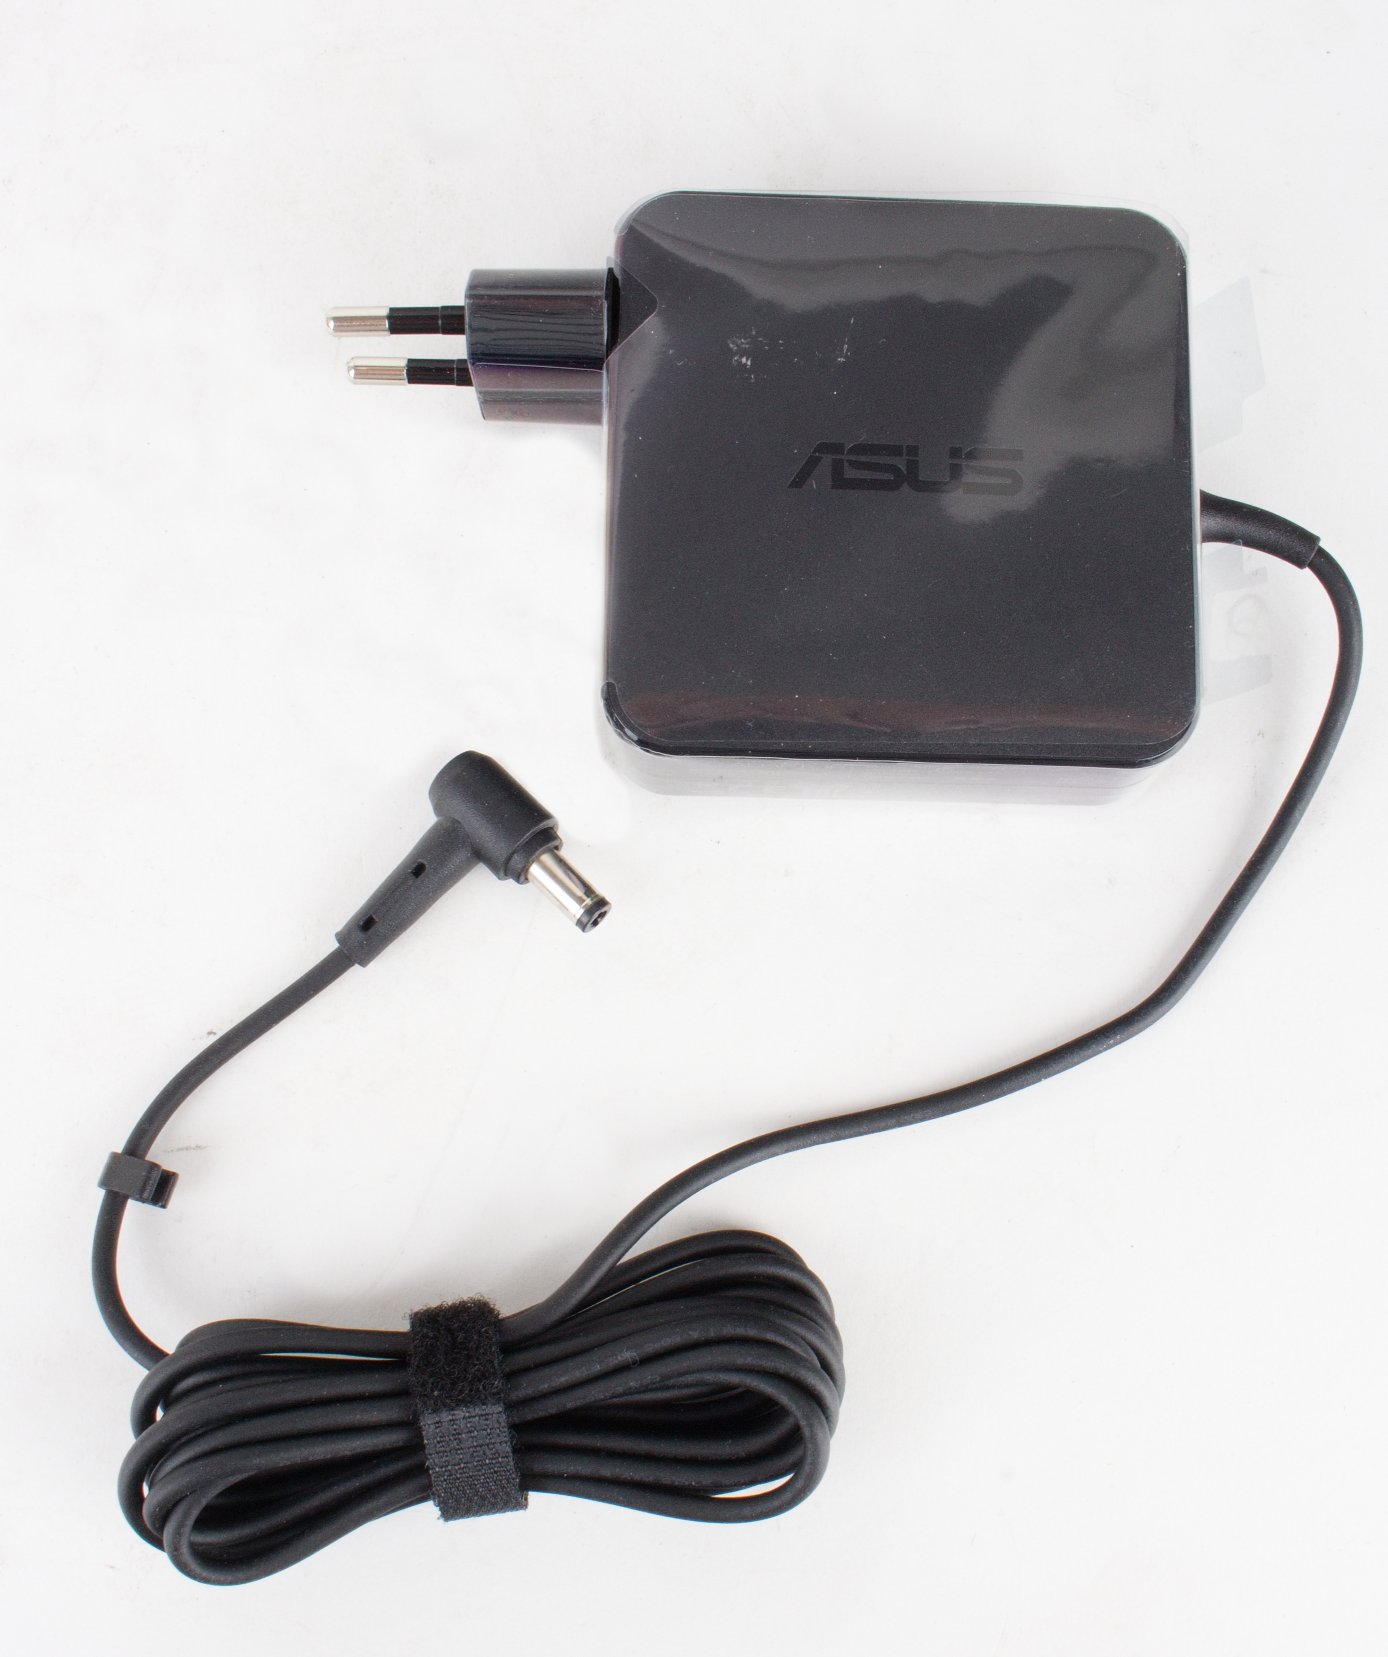 Asus AD887020 adapter